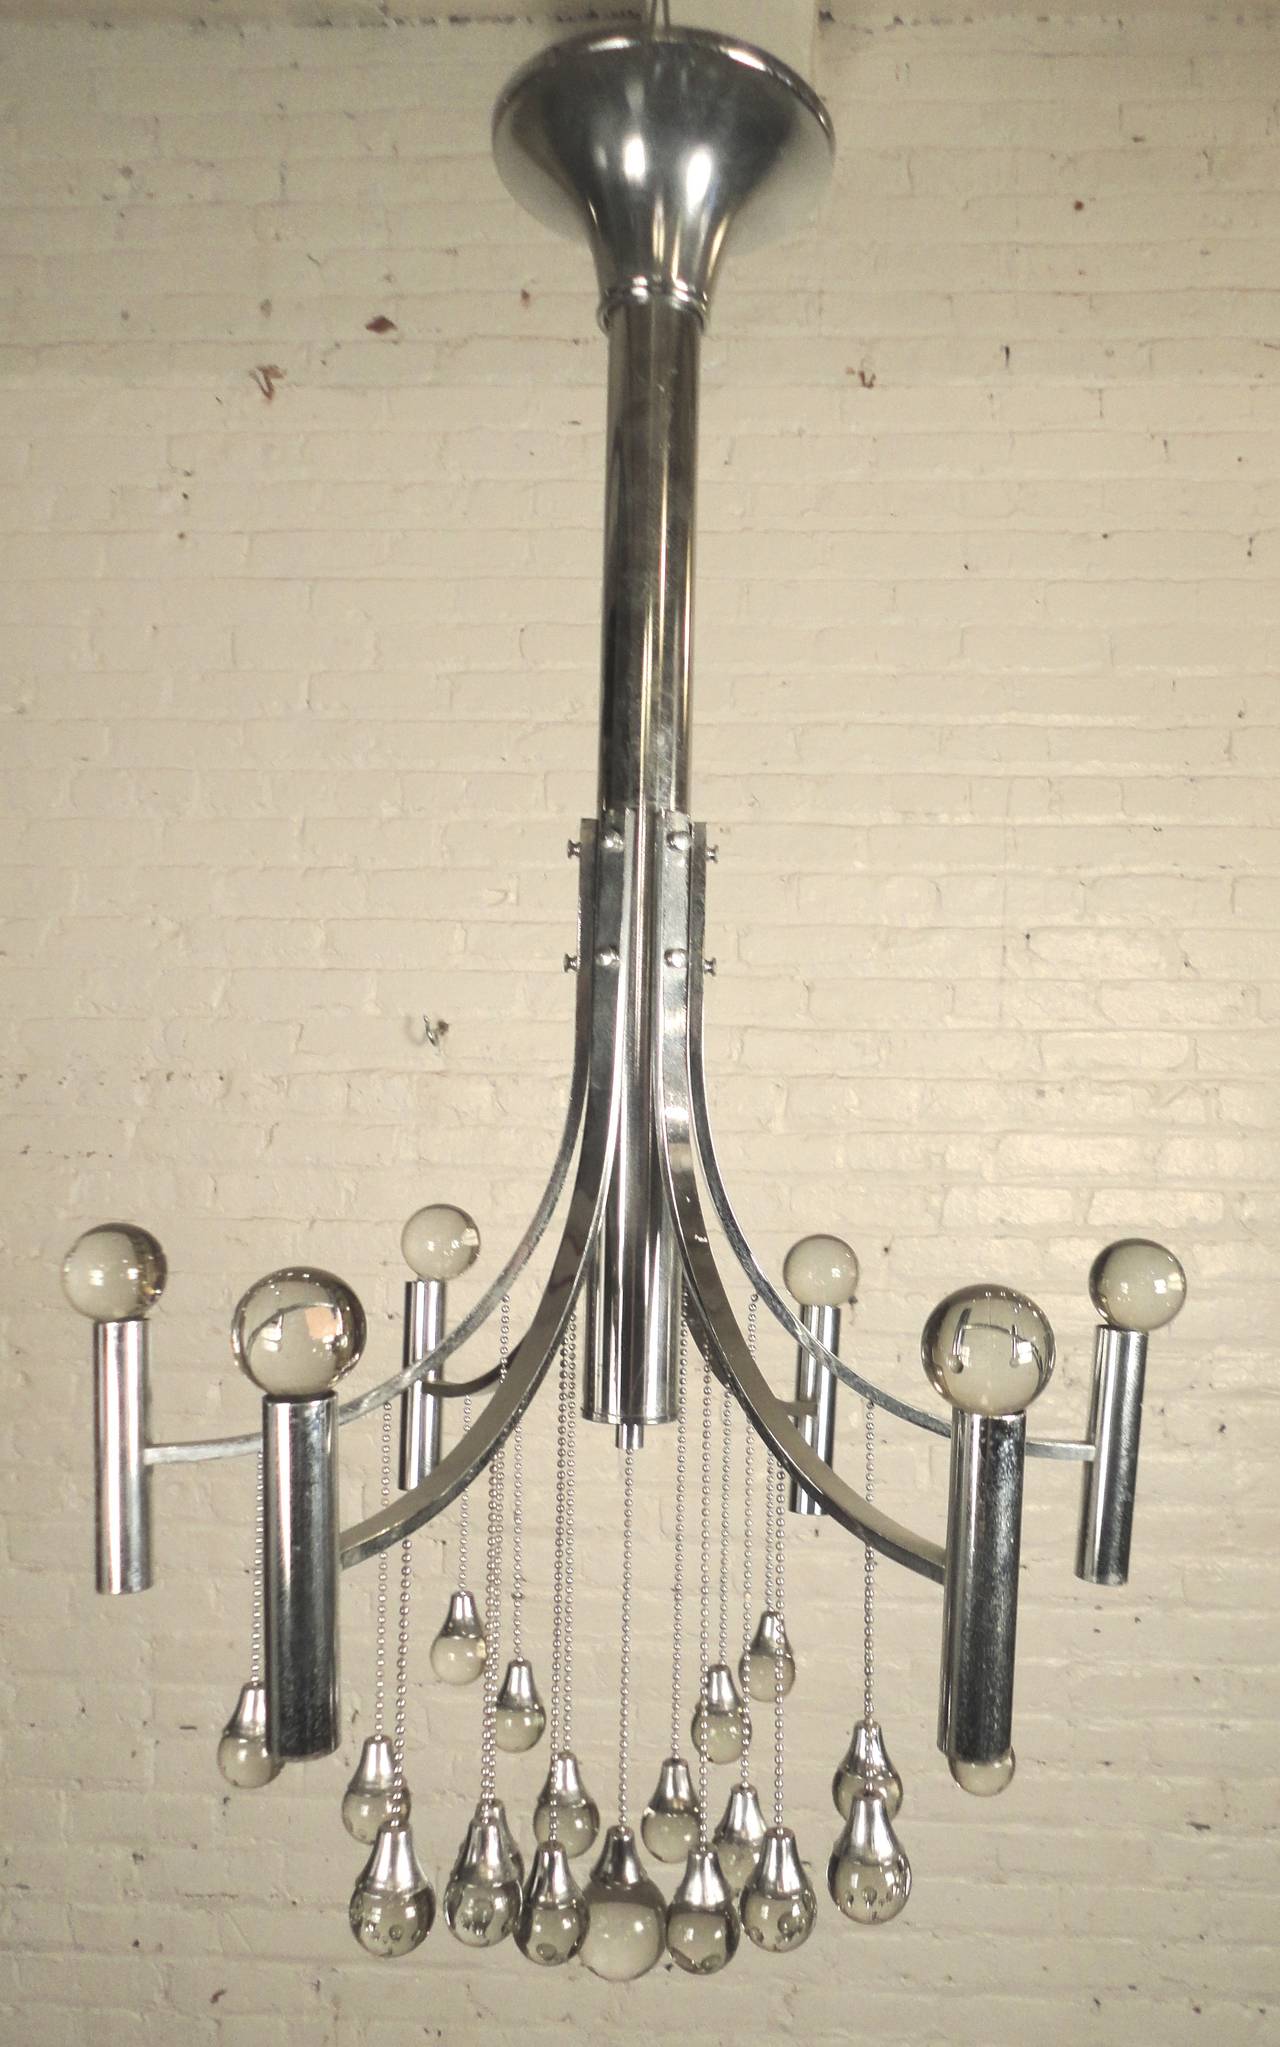 Mid-Century chrome frame chandelier by Gaetano Sciolari. Beautifully decorated with glass globes suspended by thin chains. Six bulbs hang downward.

(Please confirm item location - NY or NJ - with dealer).